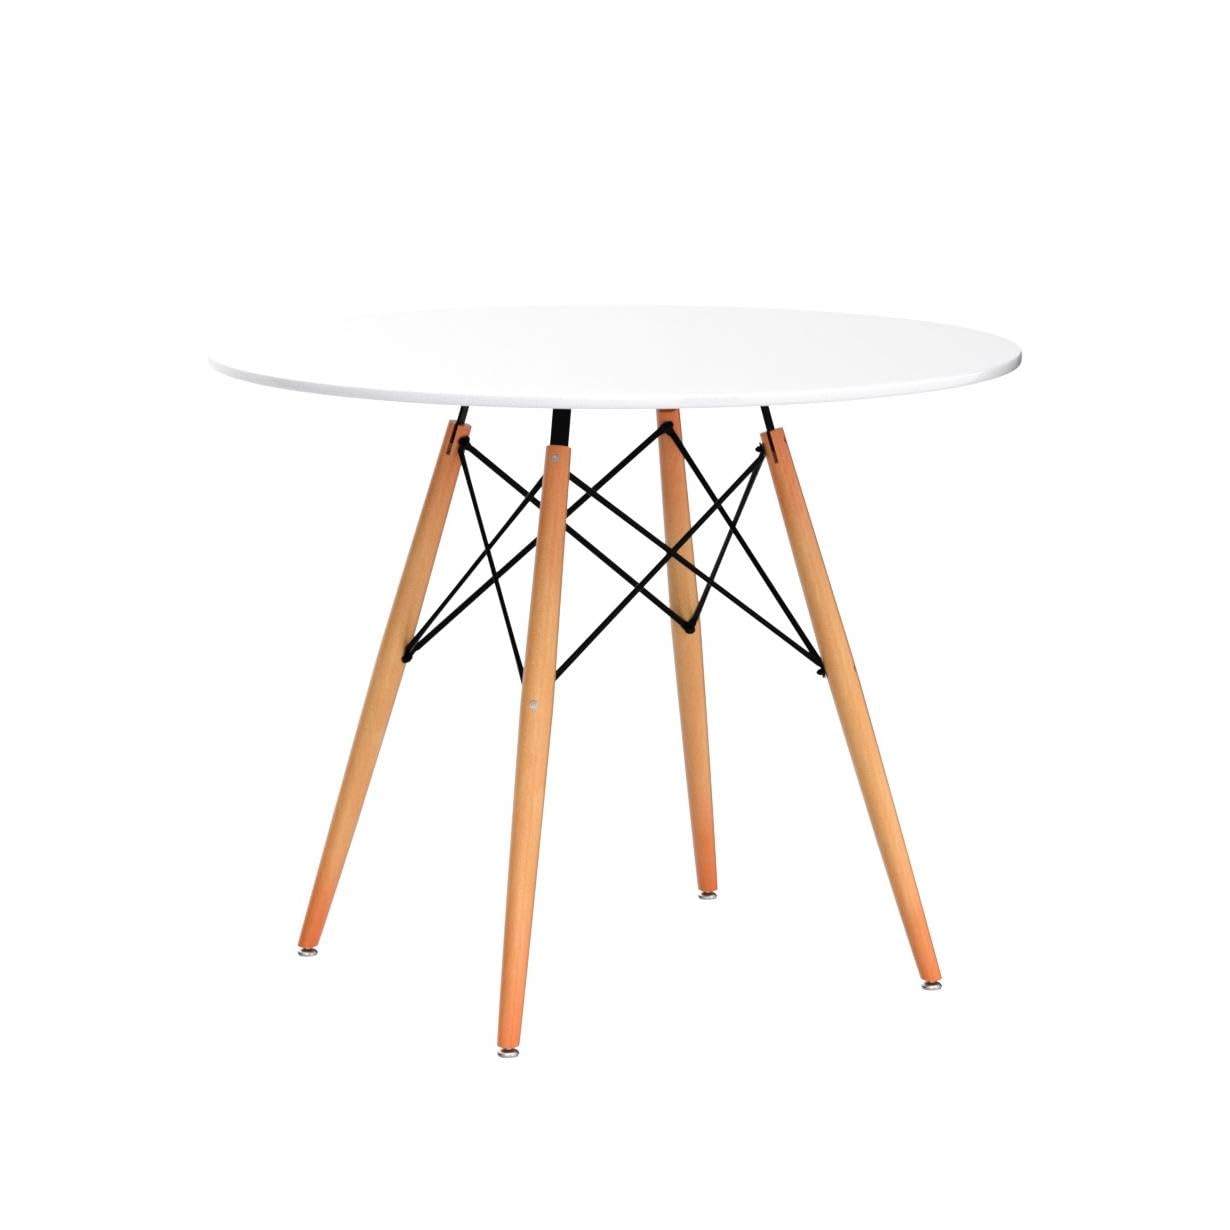 Round White Dining Kitchen Table Modern Leisure Table 31.5" with Wooden Legs for Office & Conference 2 to 4 People